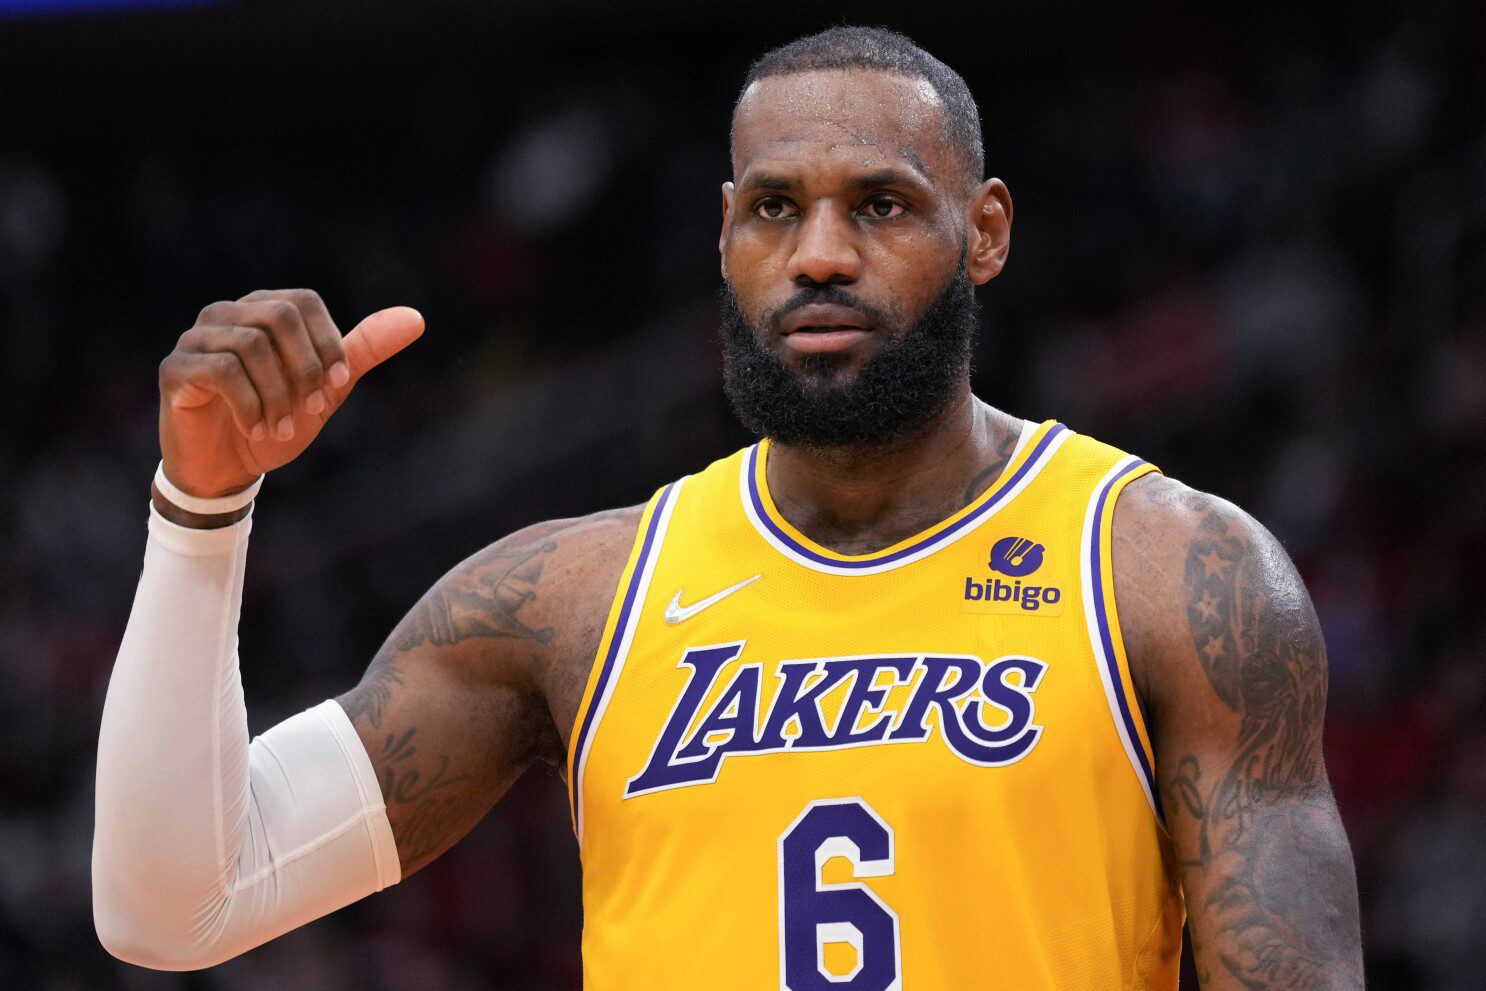 How did LeBron James Built His Net Worth?